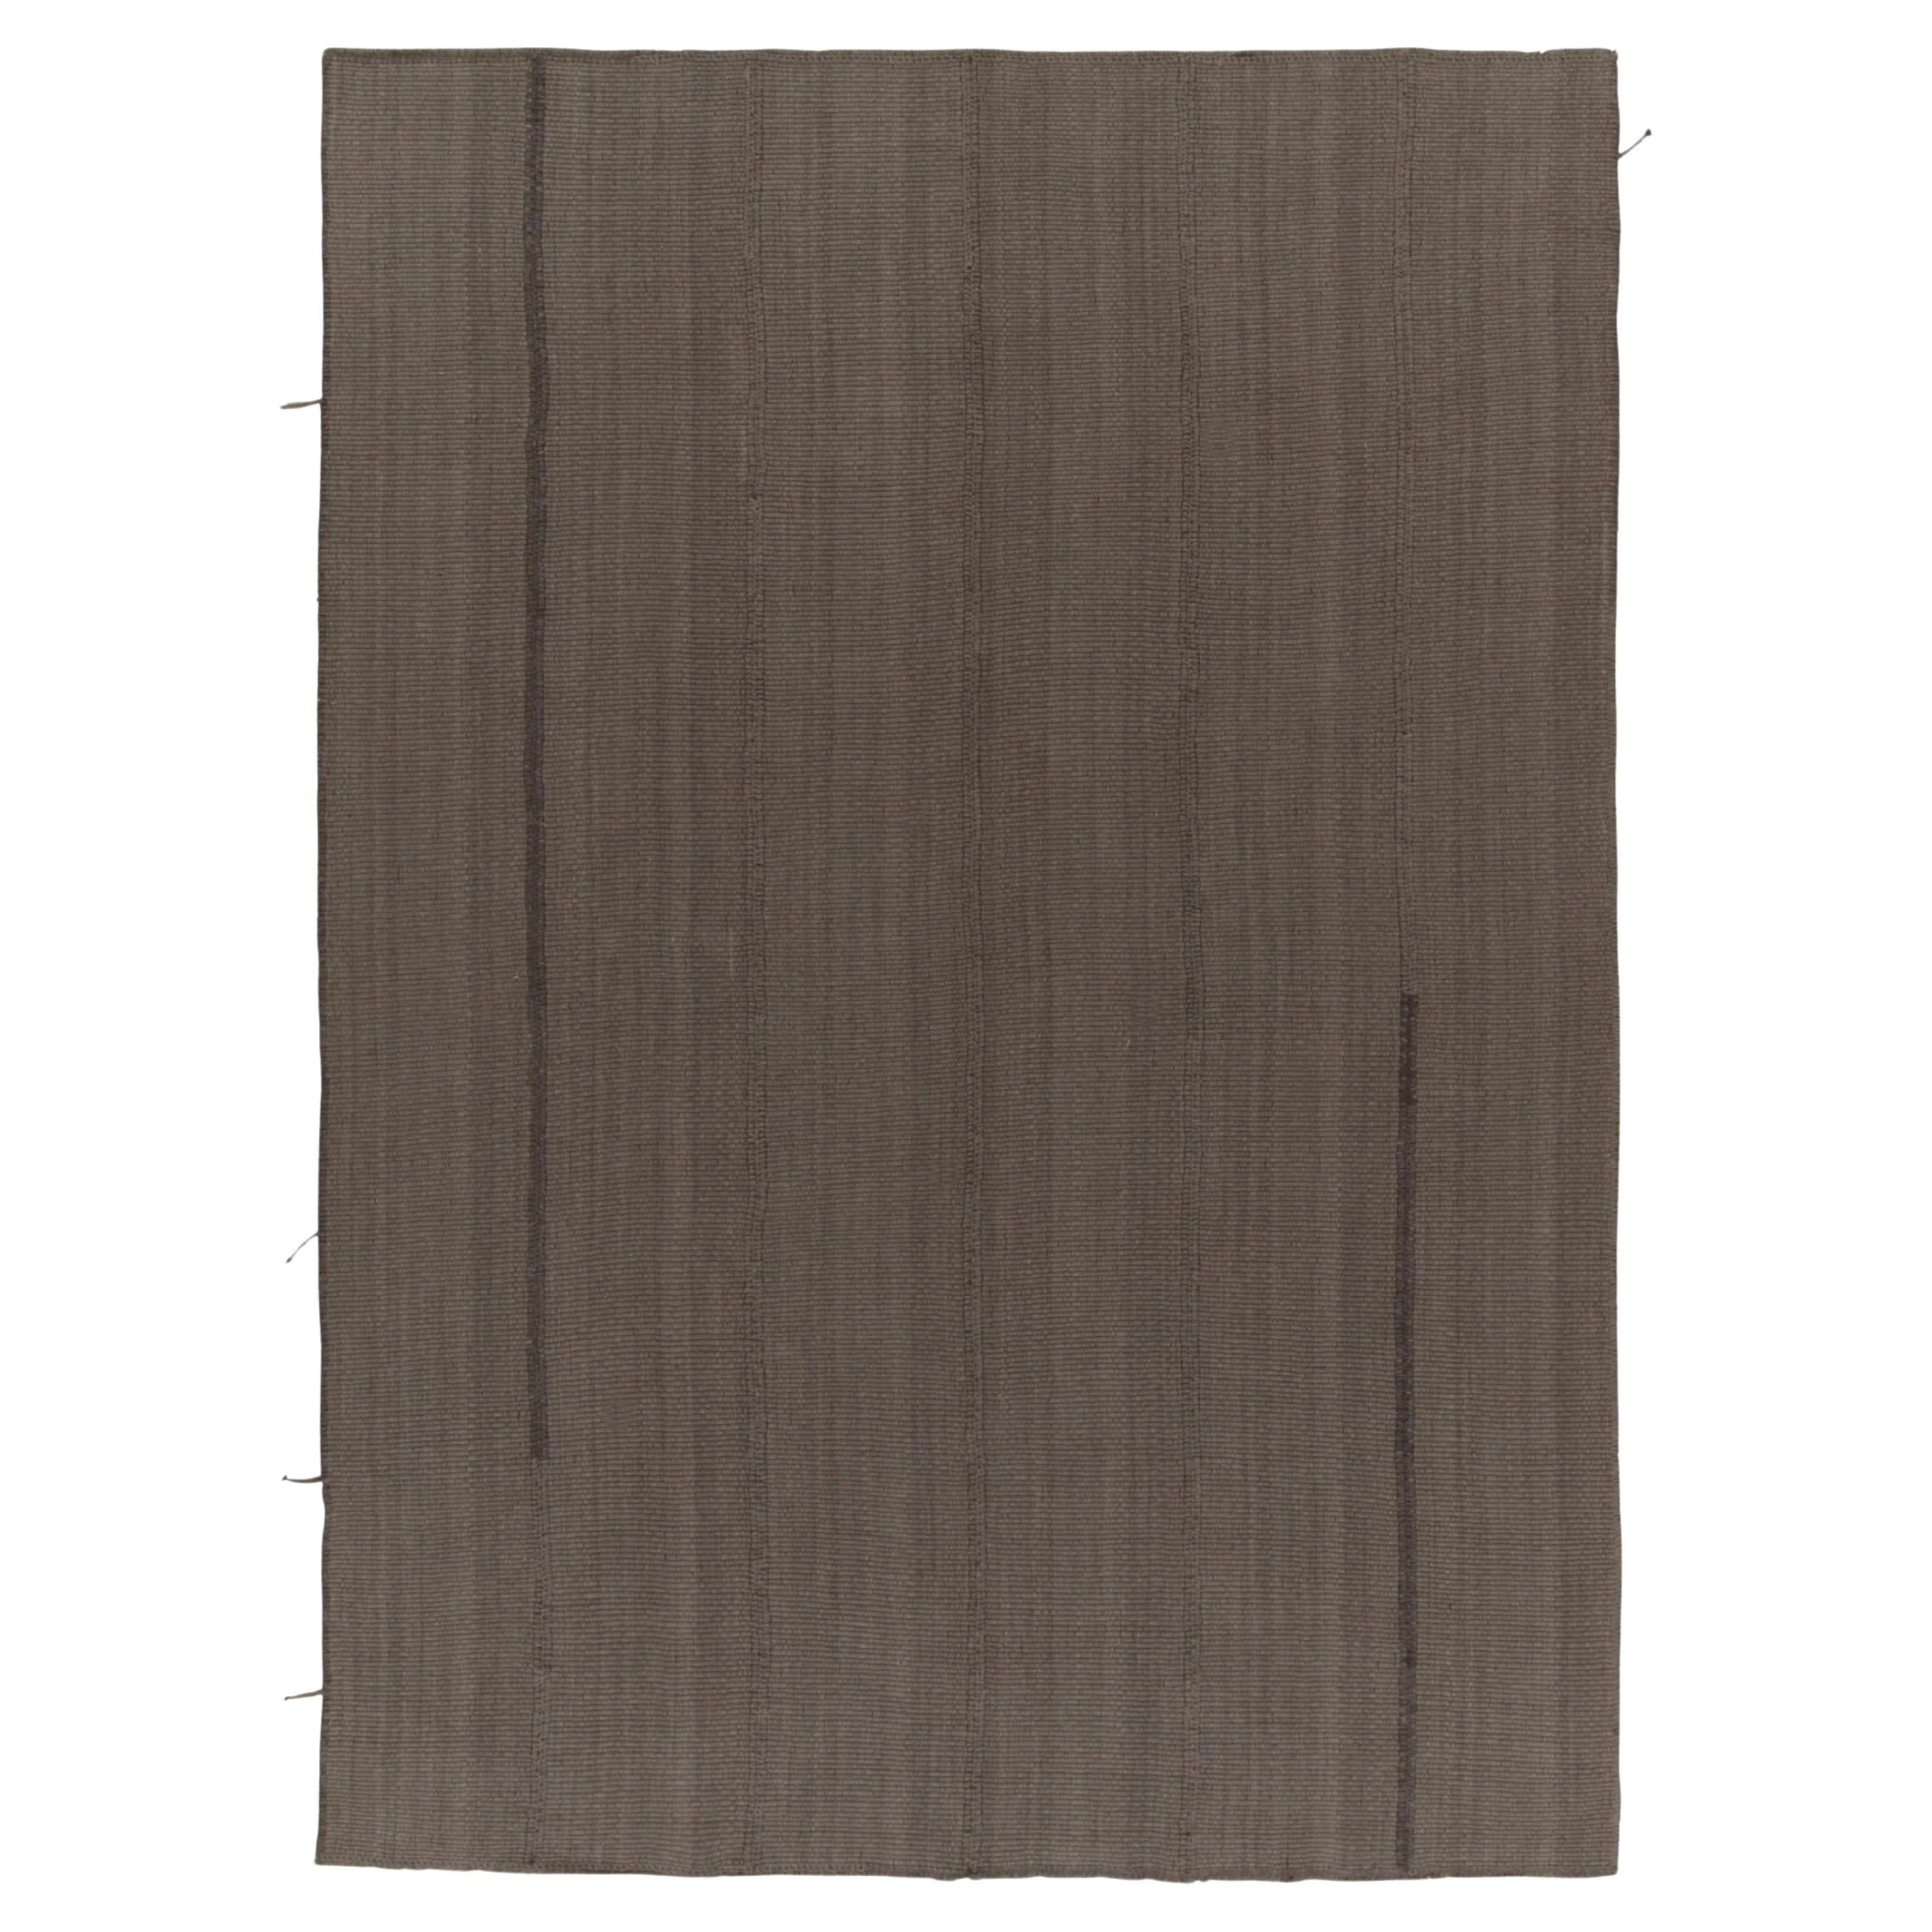 Rug & Kilim’s Contemporary Kilims in Muted Brown Stripes, Panel Woven Style For Sale